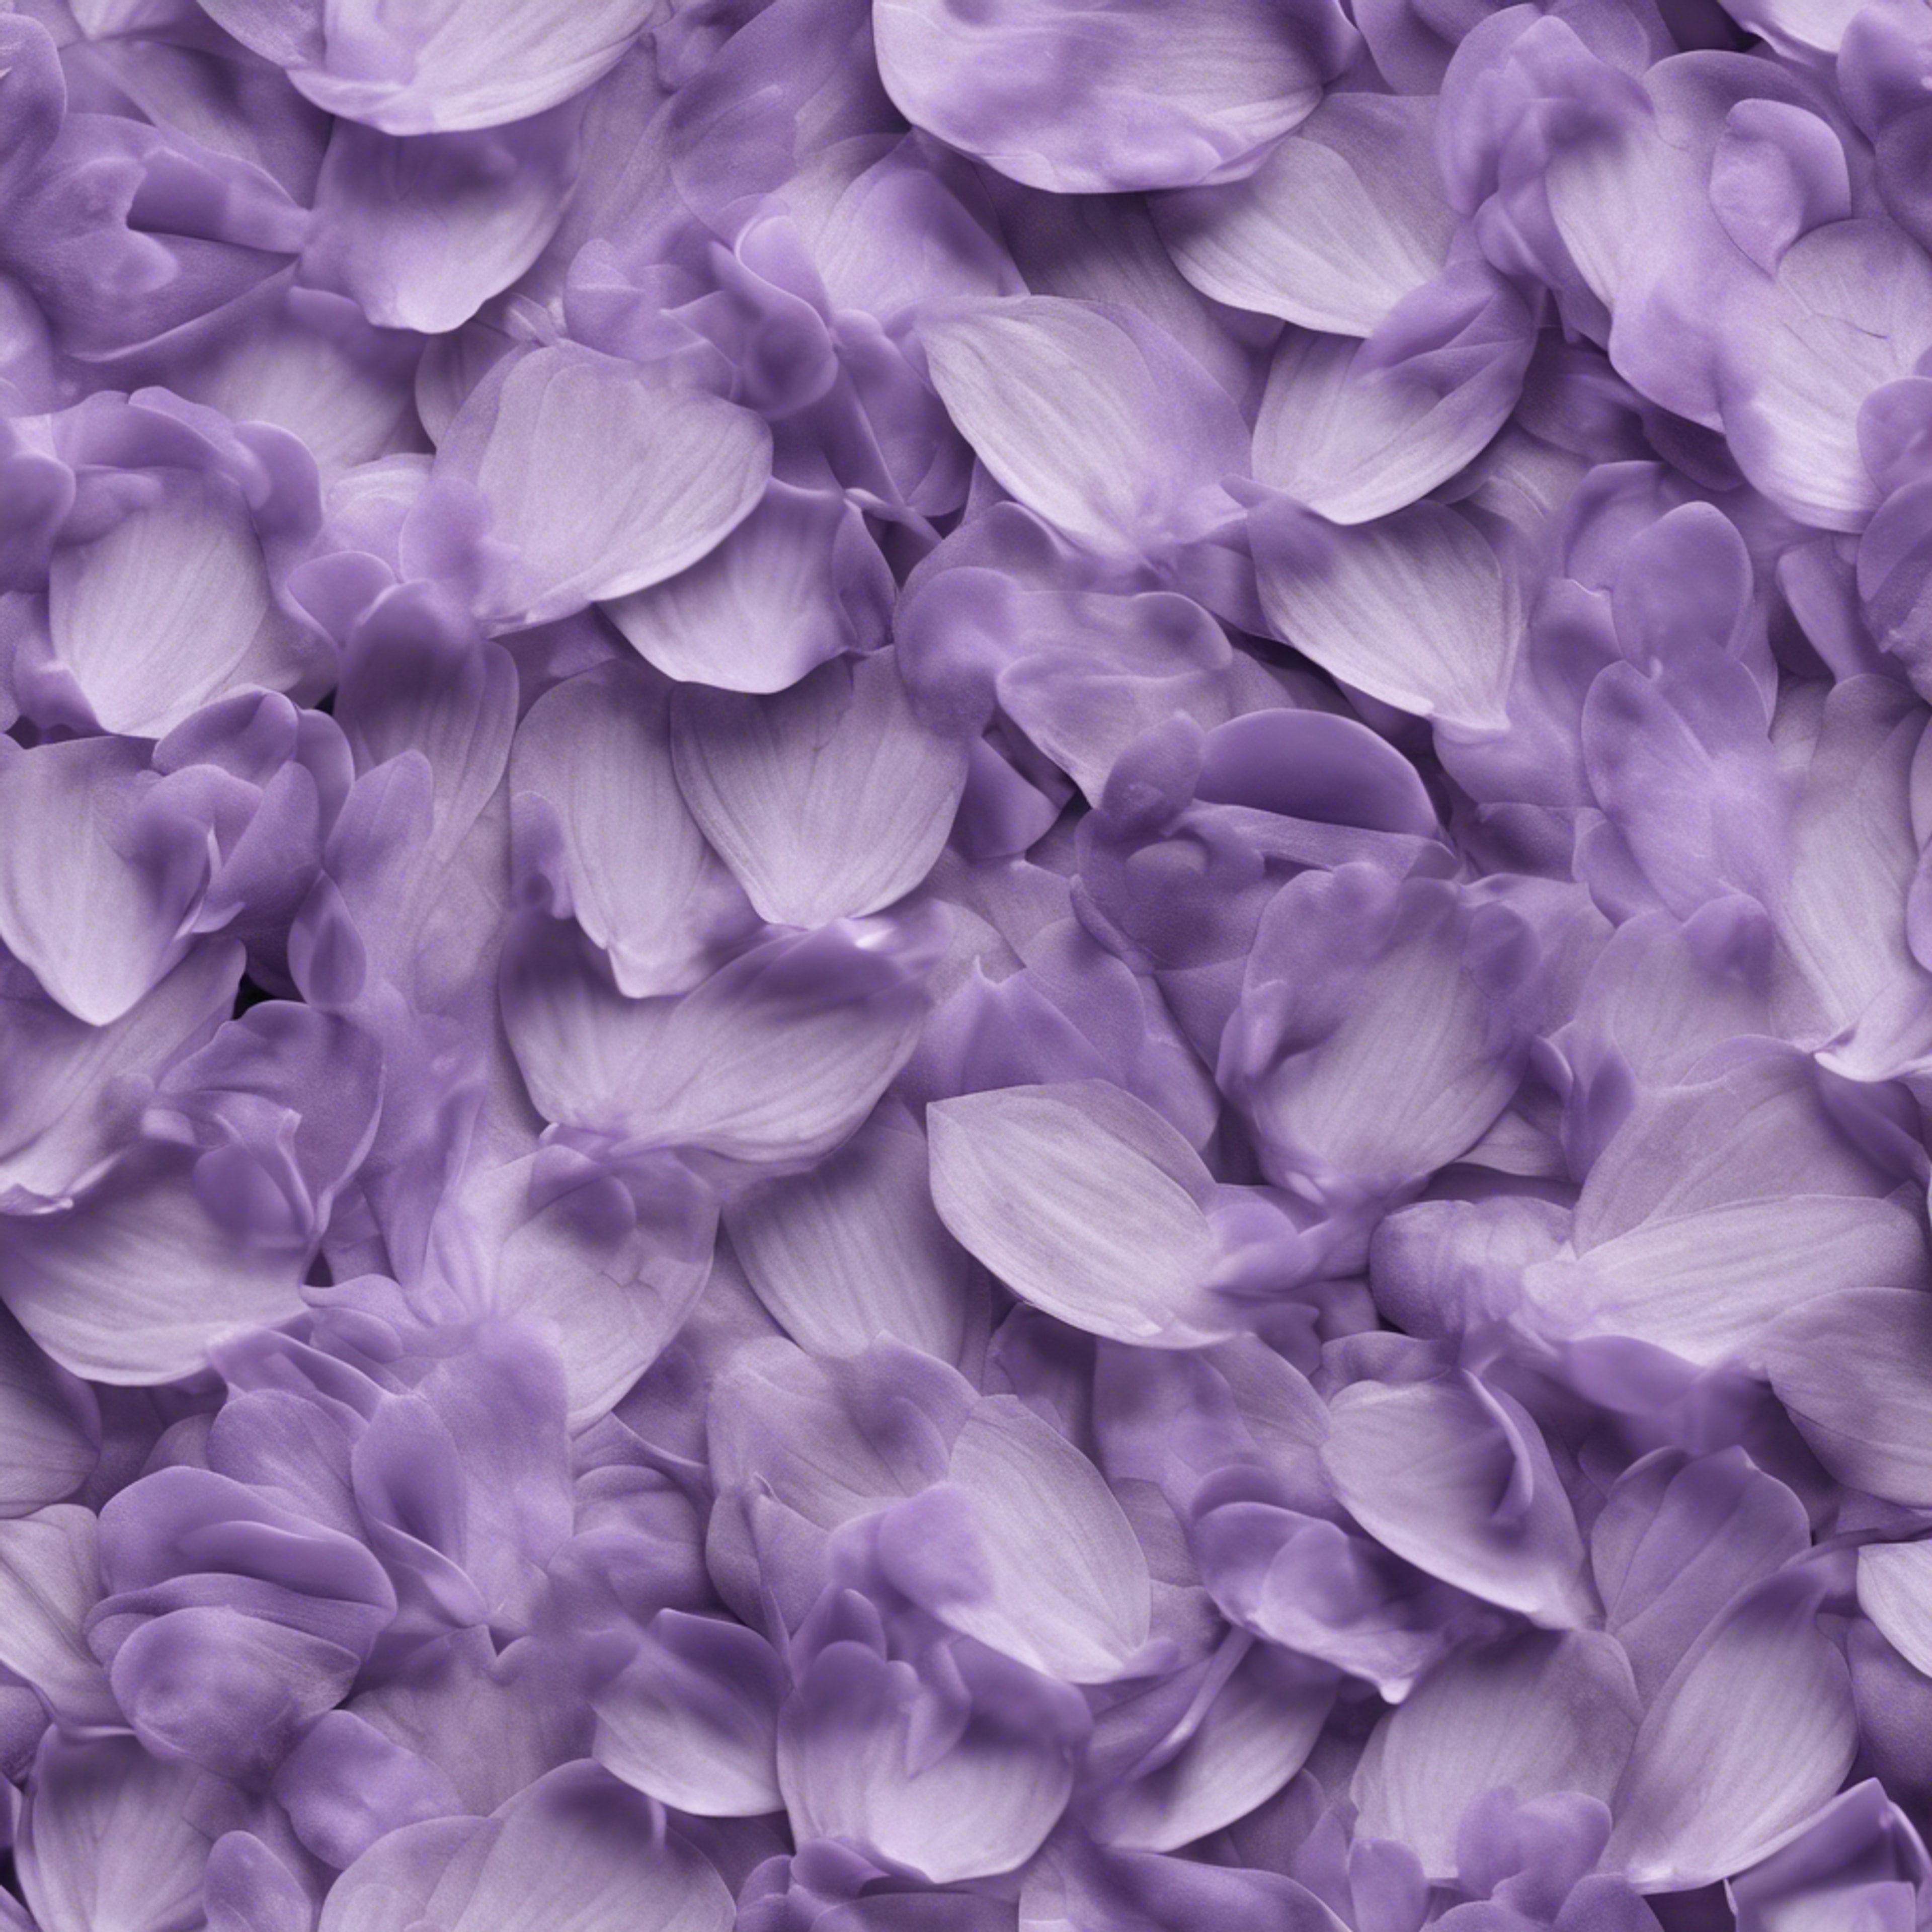 Seamless delicate pattern of layered lavender petals Валлпапер[df581ced6ed94056816b]